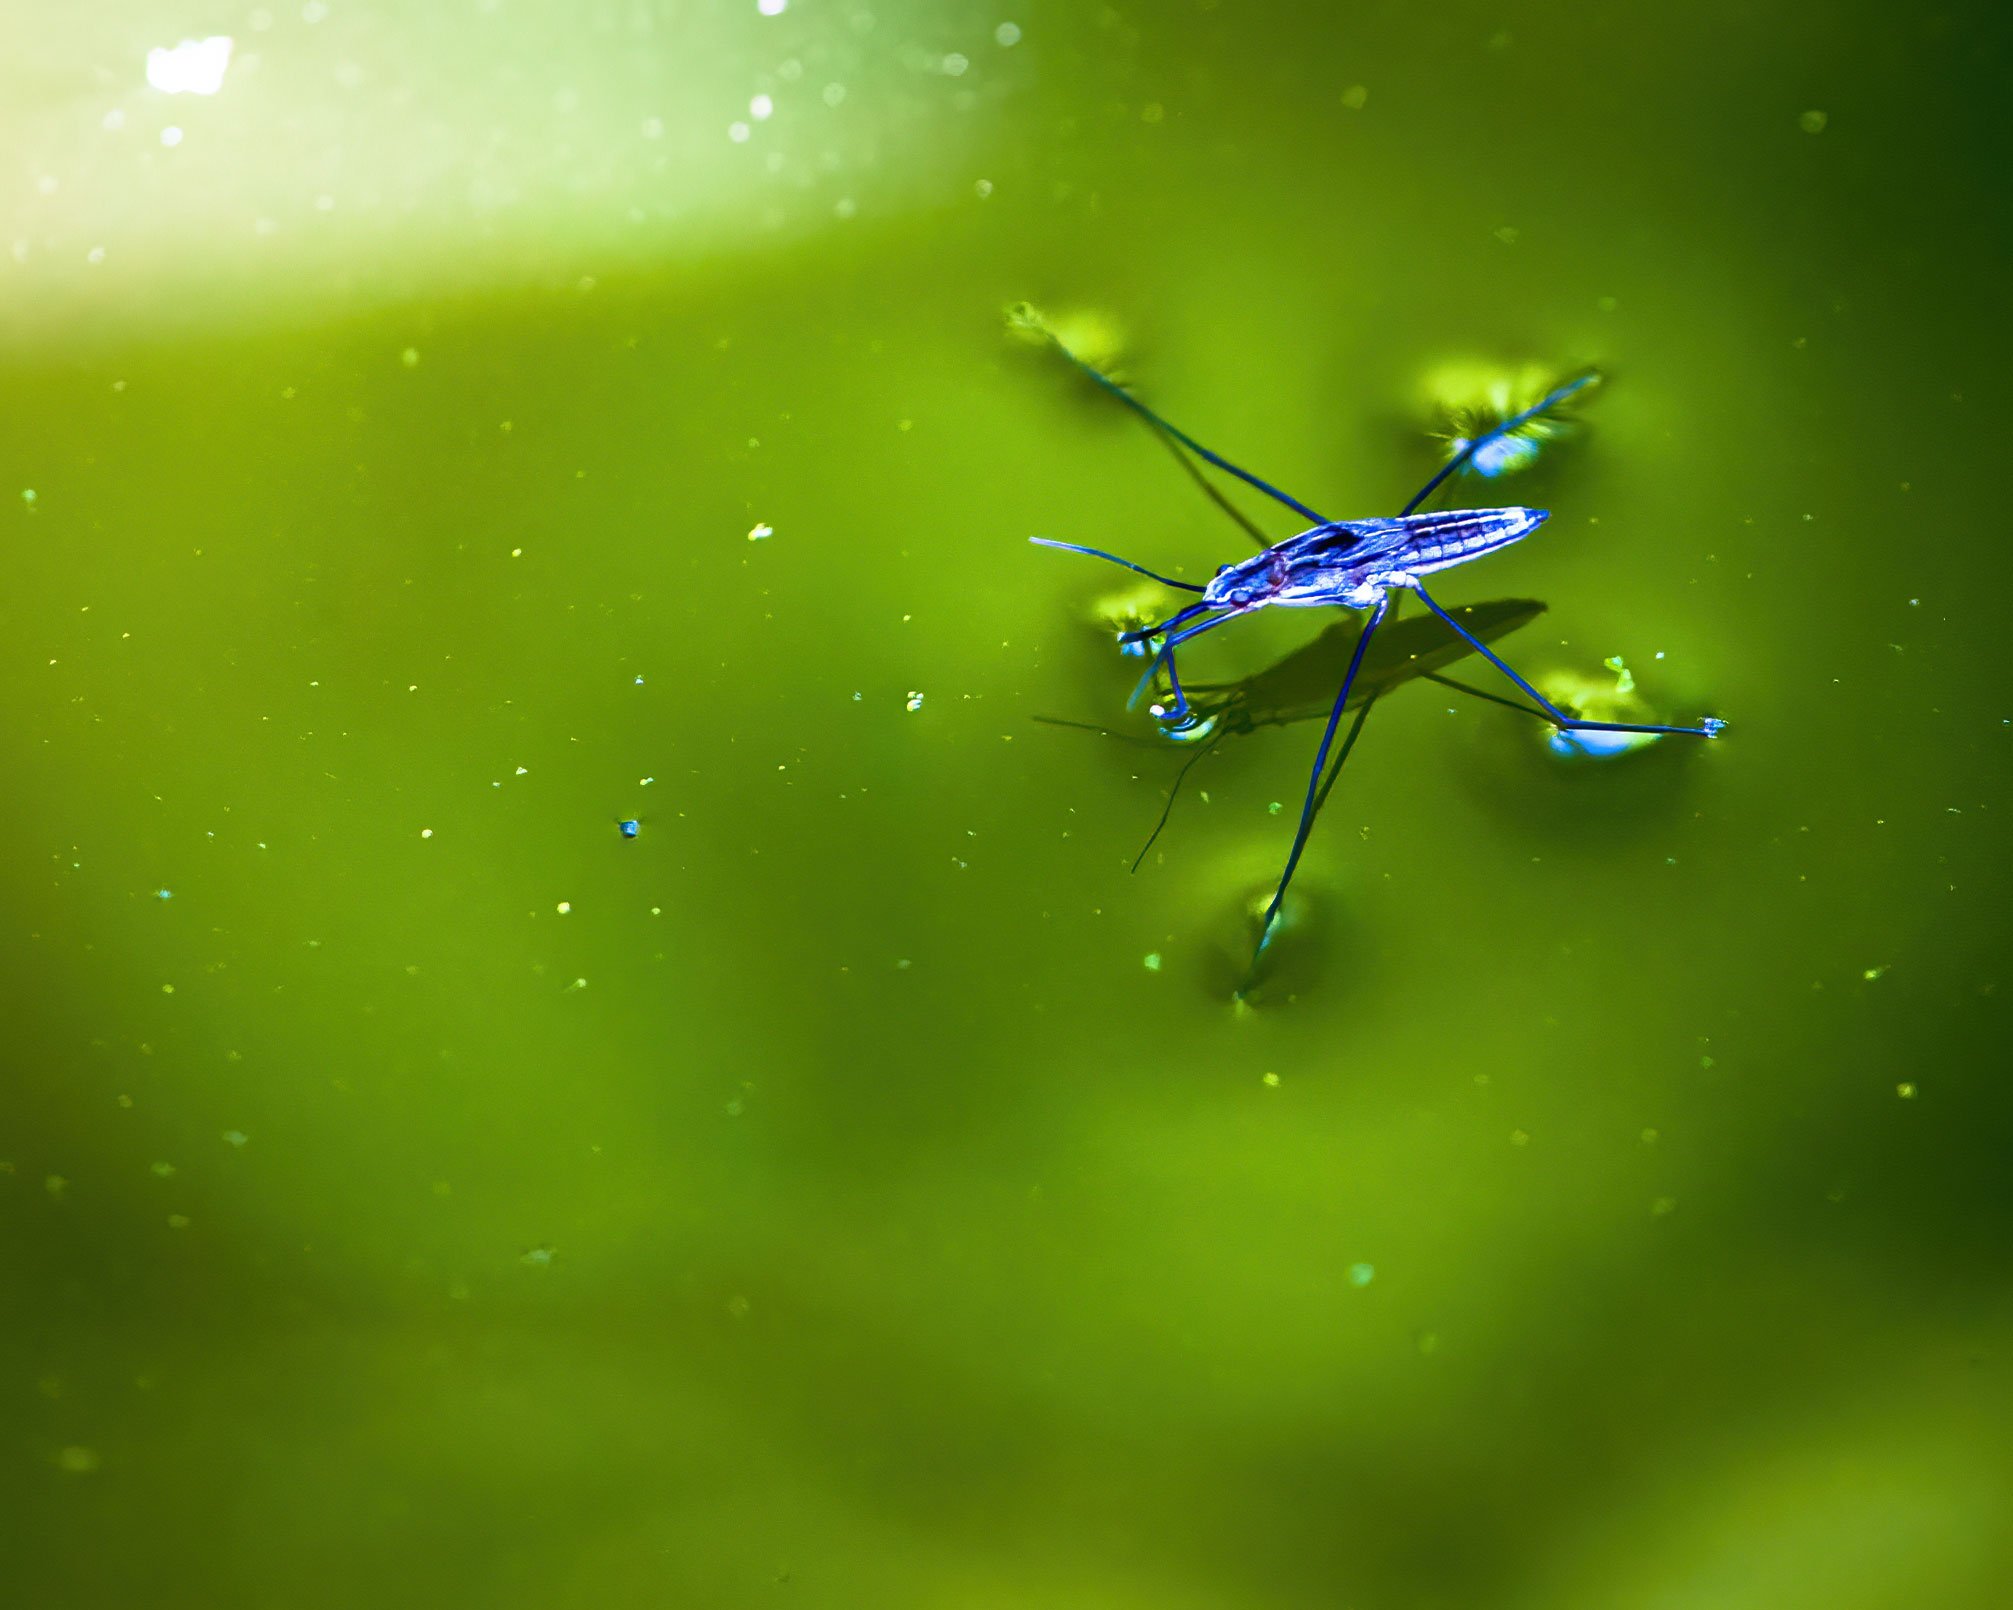 Water strider insect